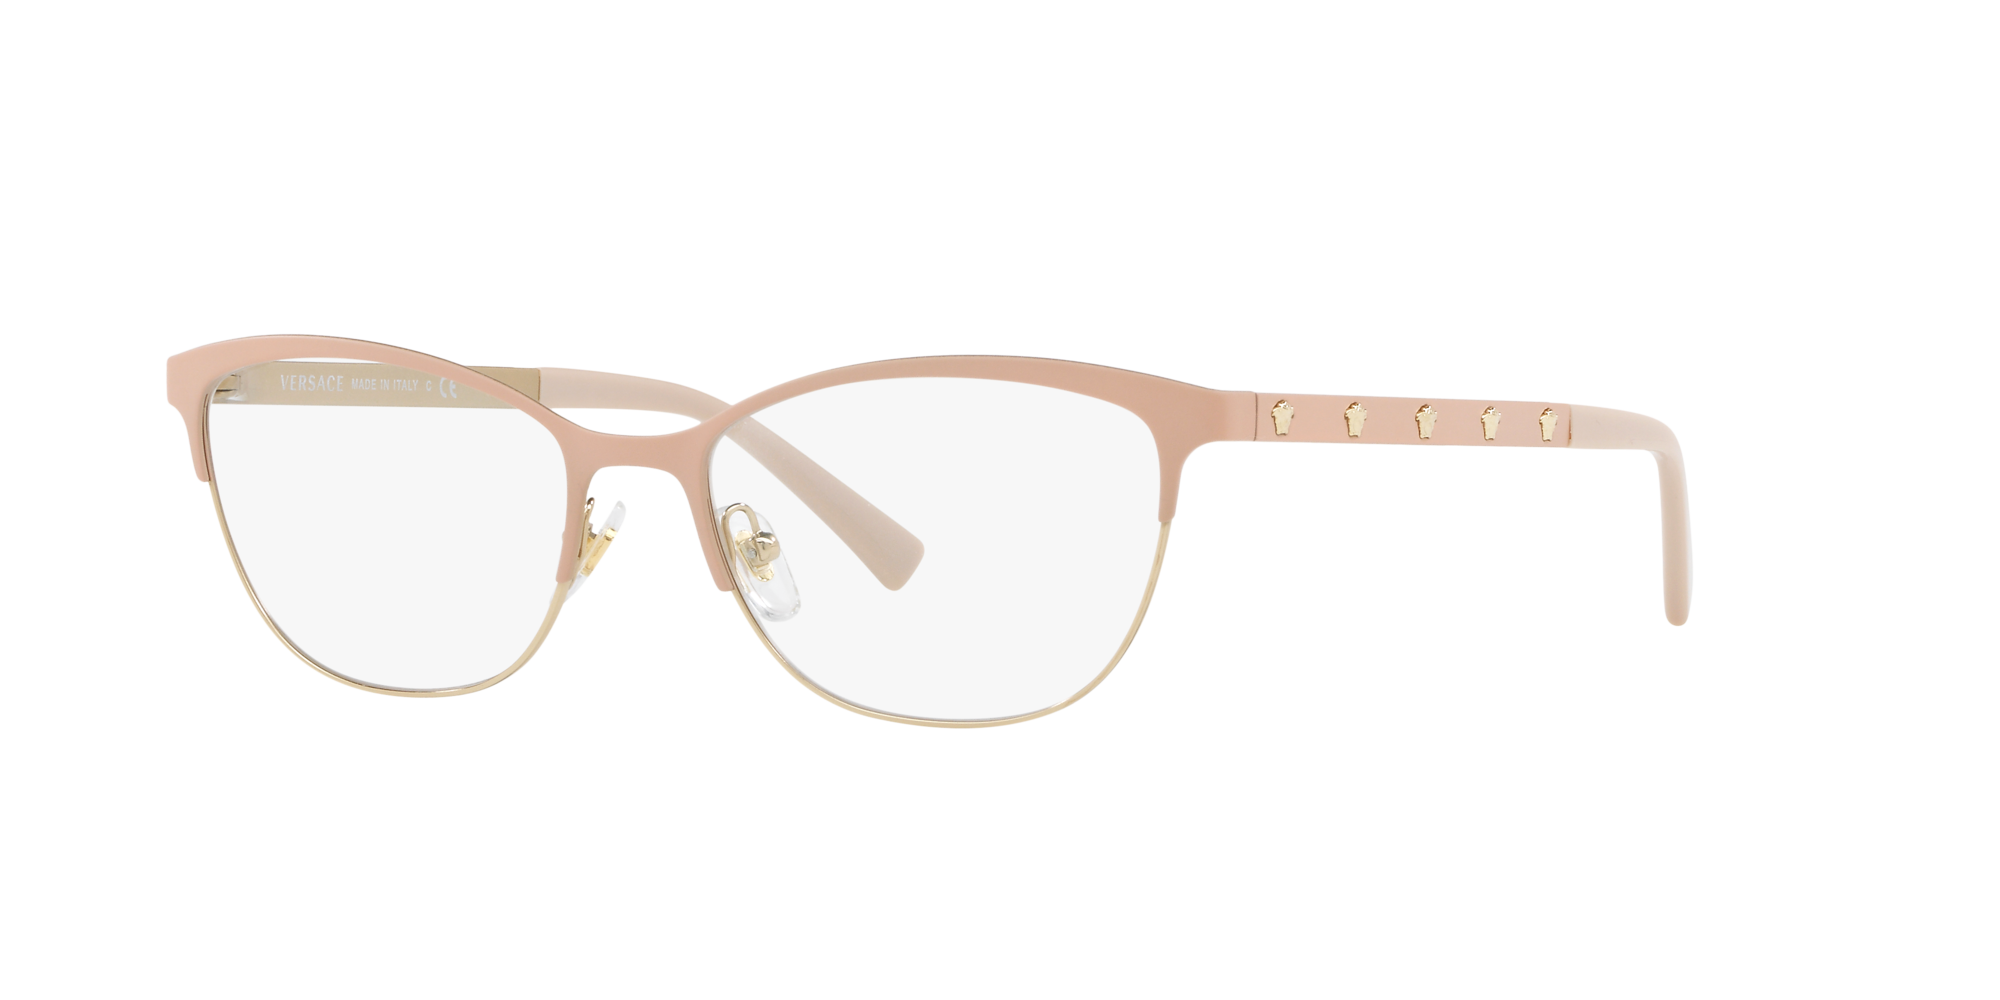 Versace 0VE1251 in Pink Glasses | OPSM